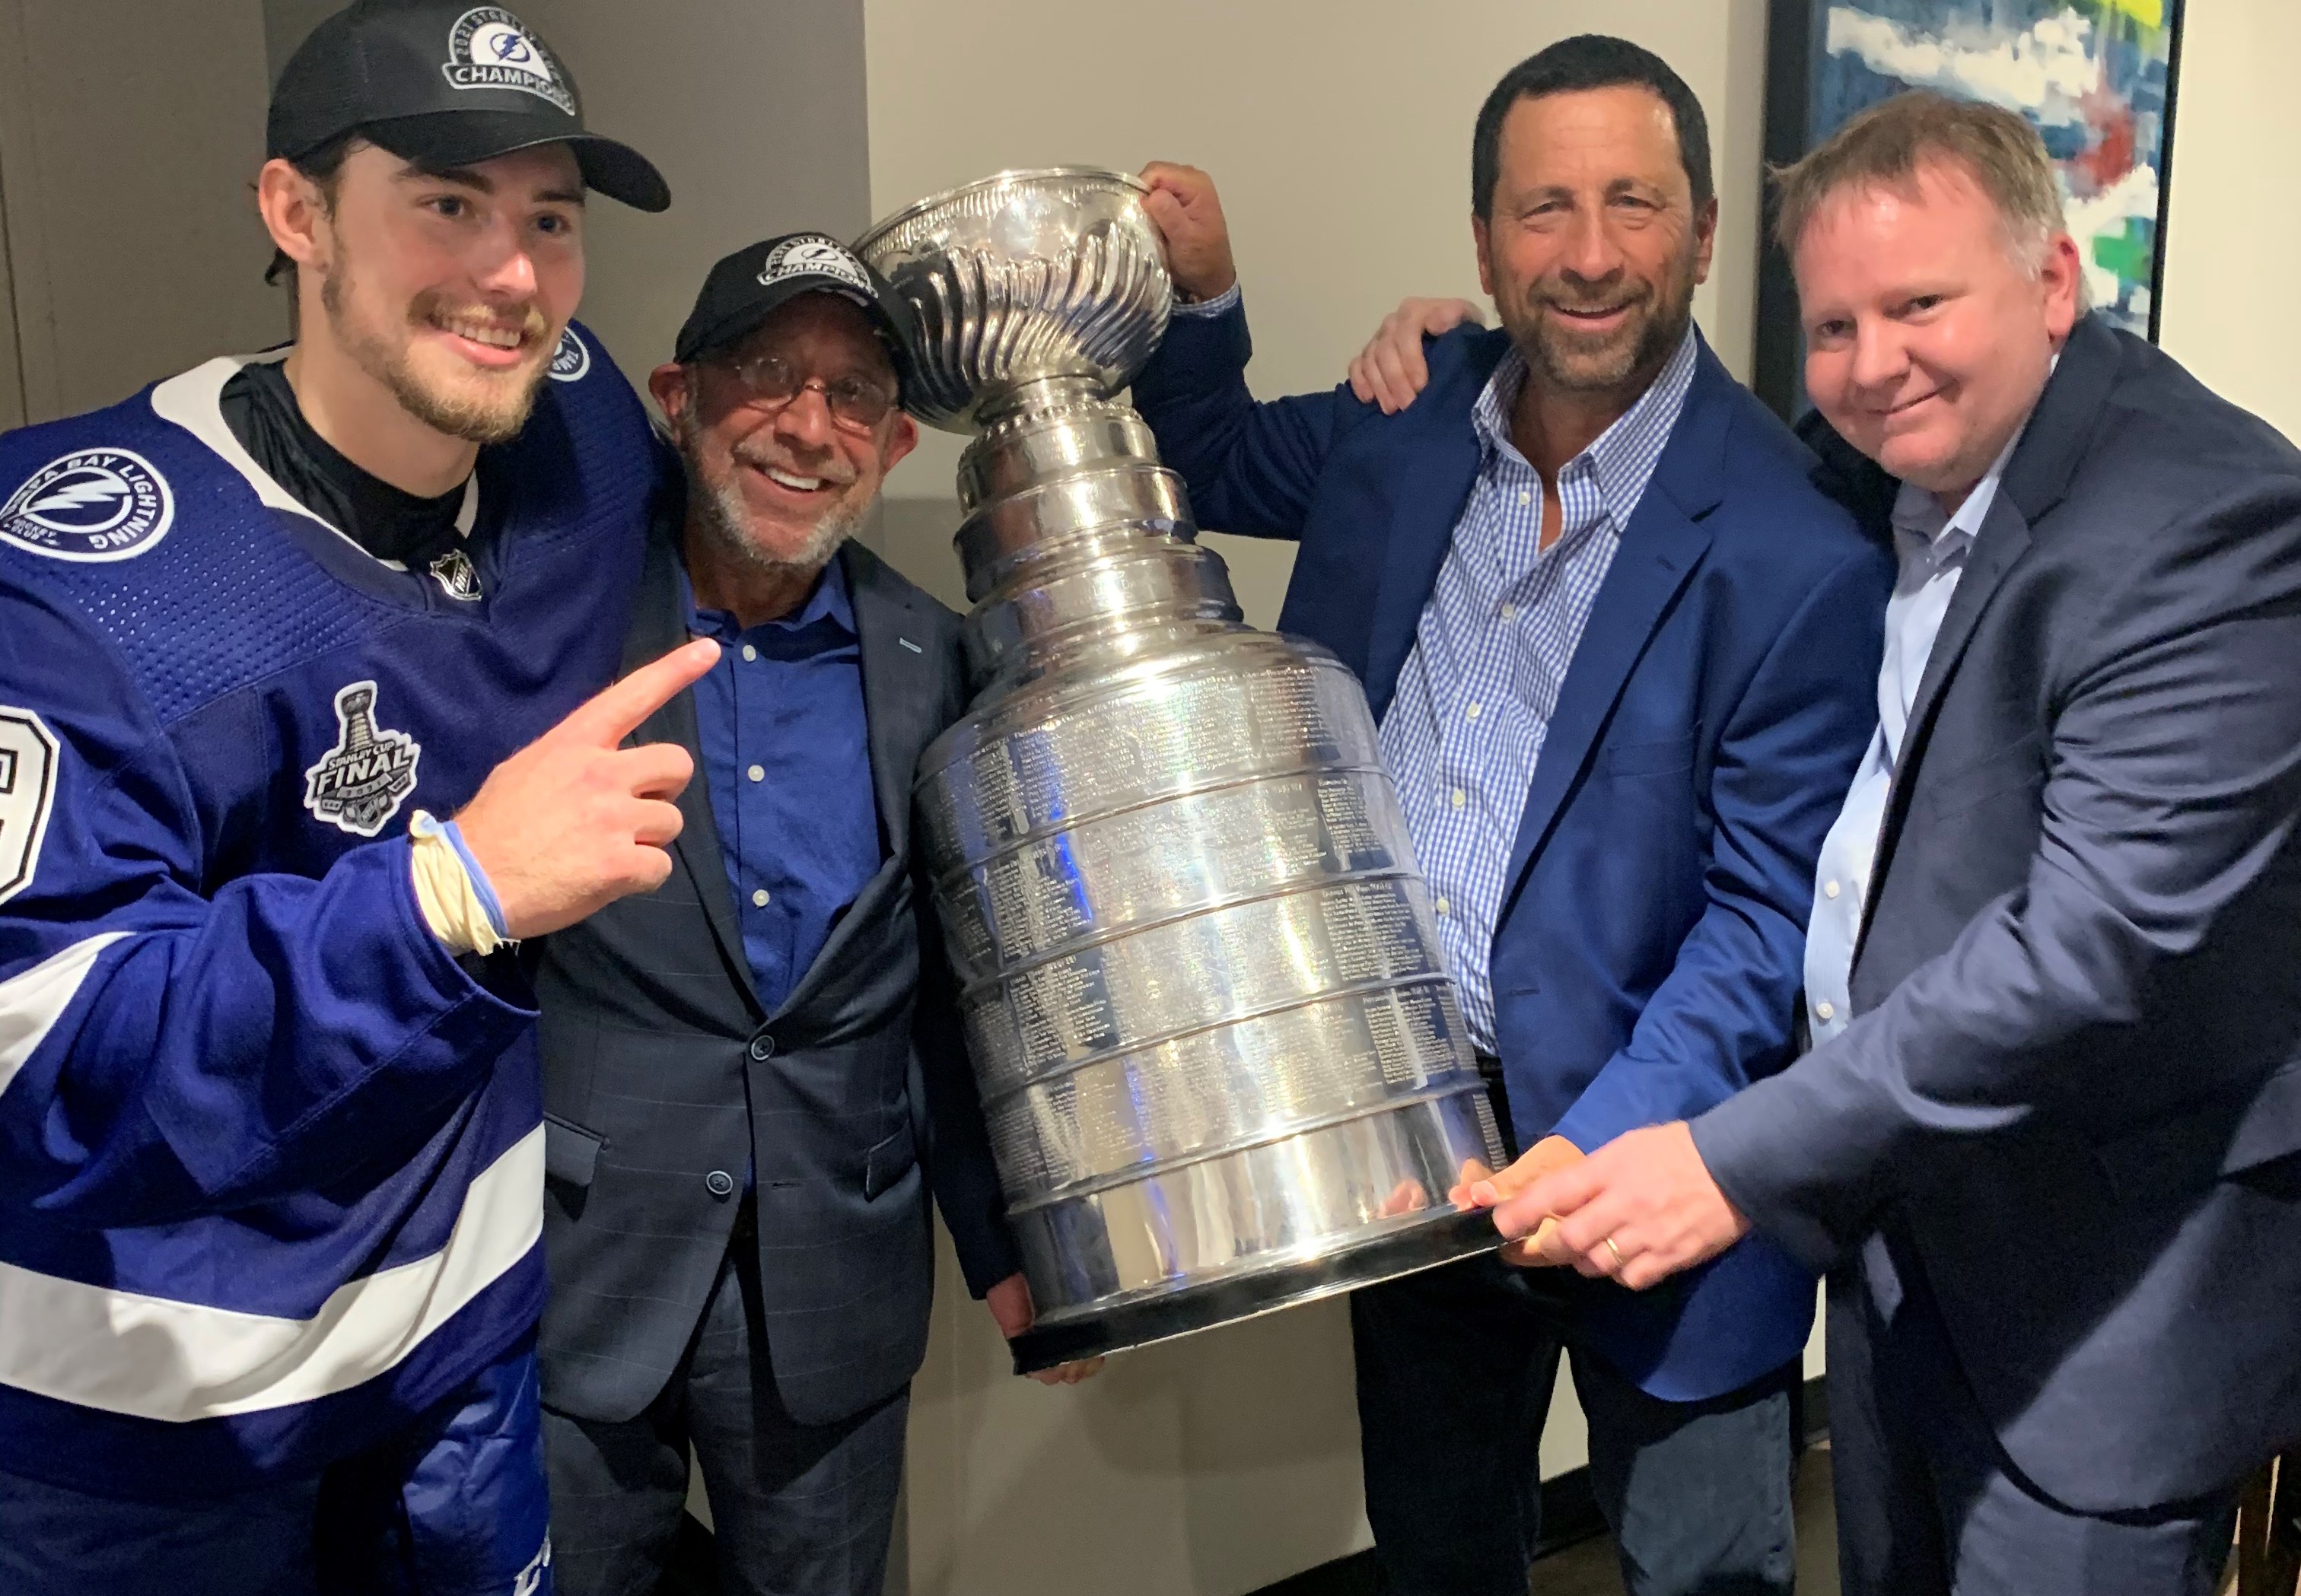 Axe: Syracuse Crunch have helped win many Stanley Cups. How about